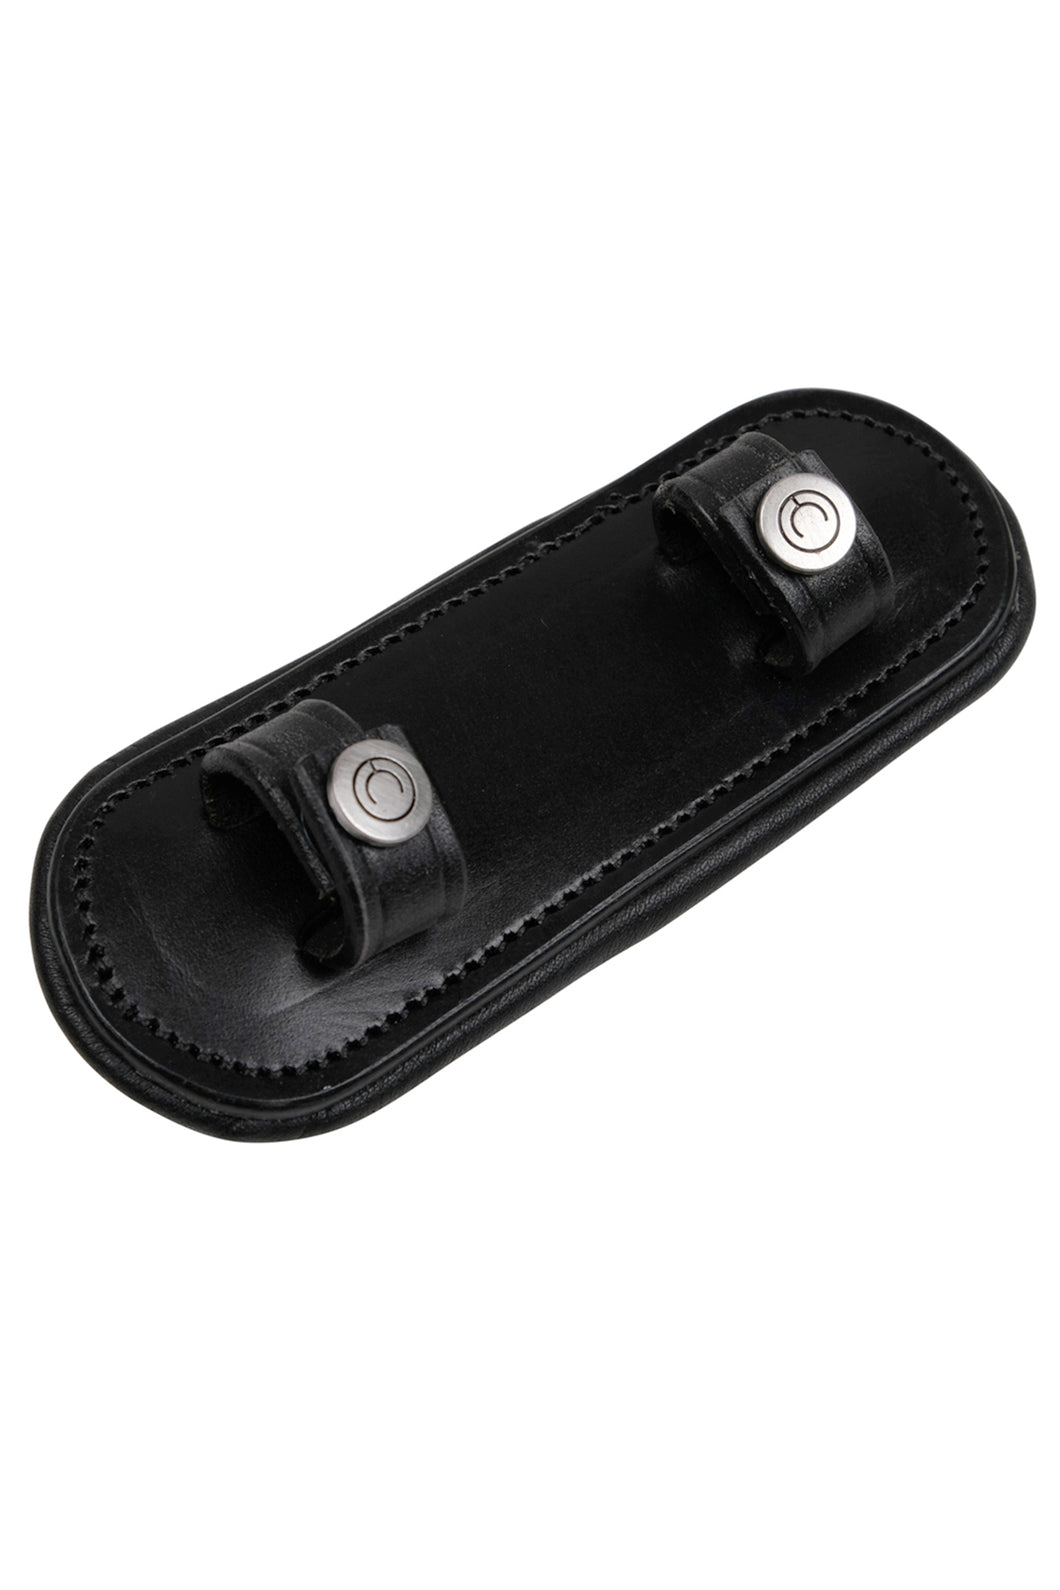 Chin Leather Protector - Black